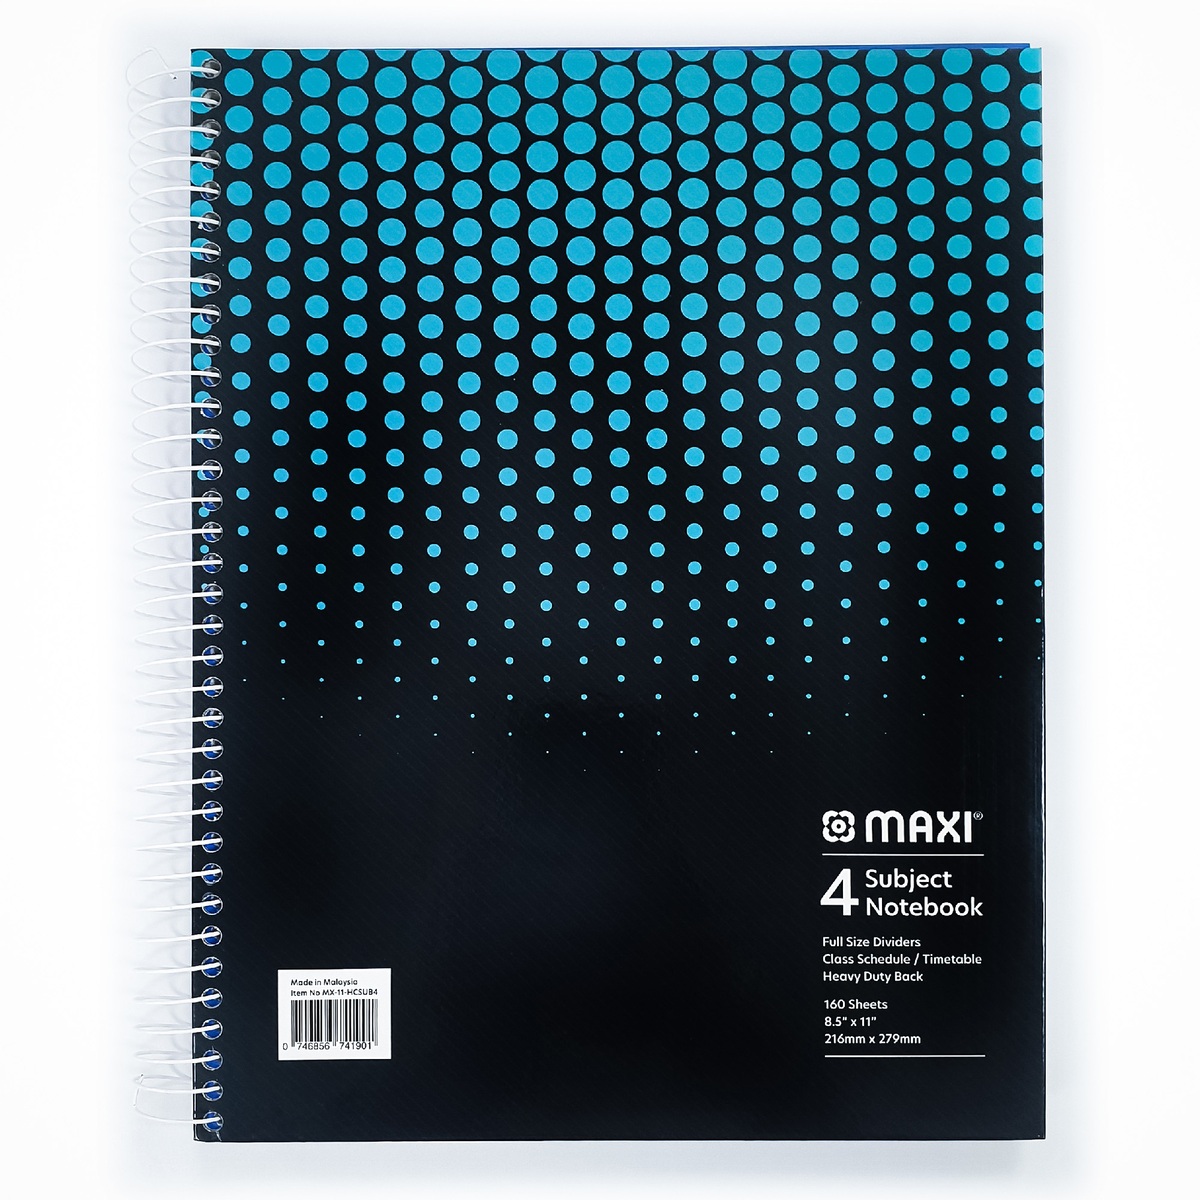 Maxi Spiral Hard Cover 4 Subject Notebook, 11 inch X 8.5 inch, 160 Sheets, Assorted Colours, MX-11-HCSUB4